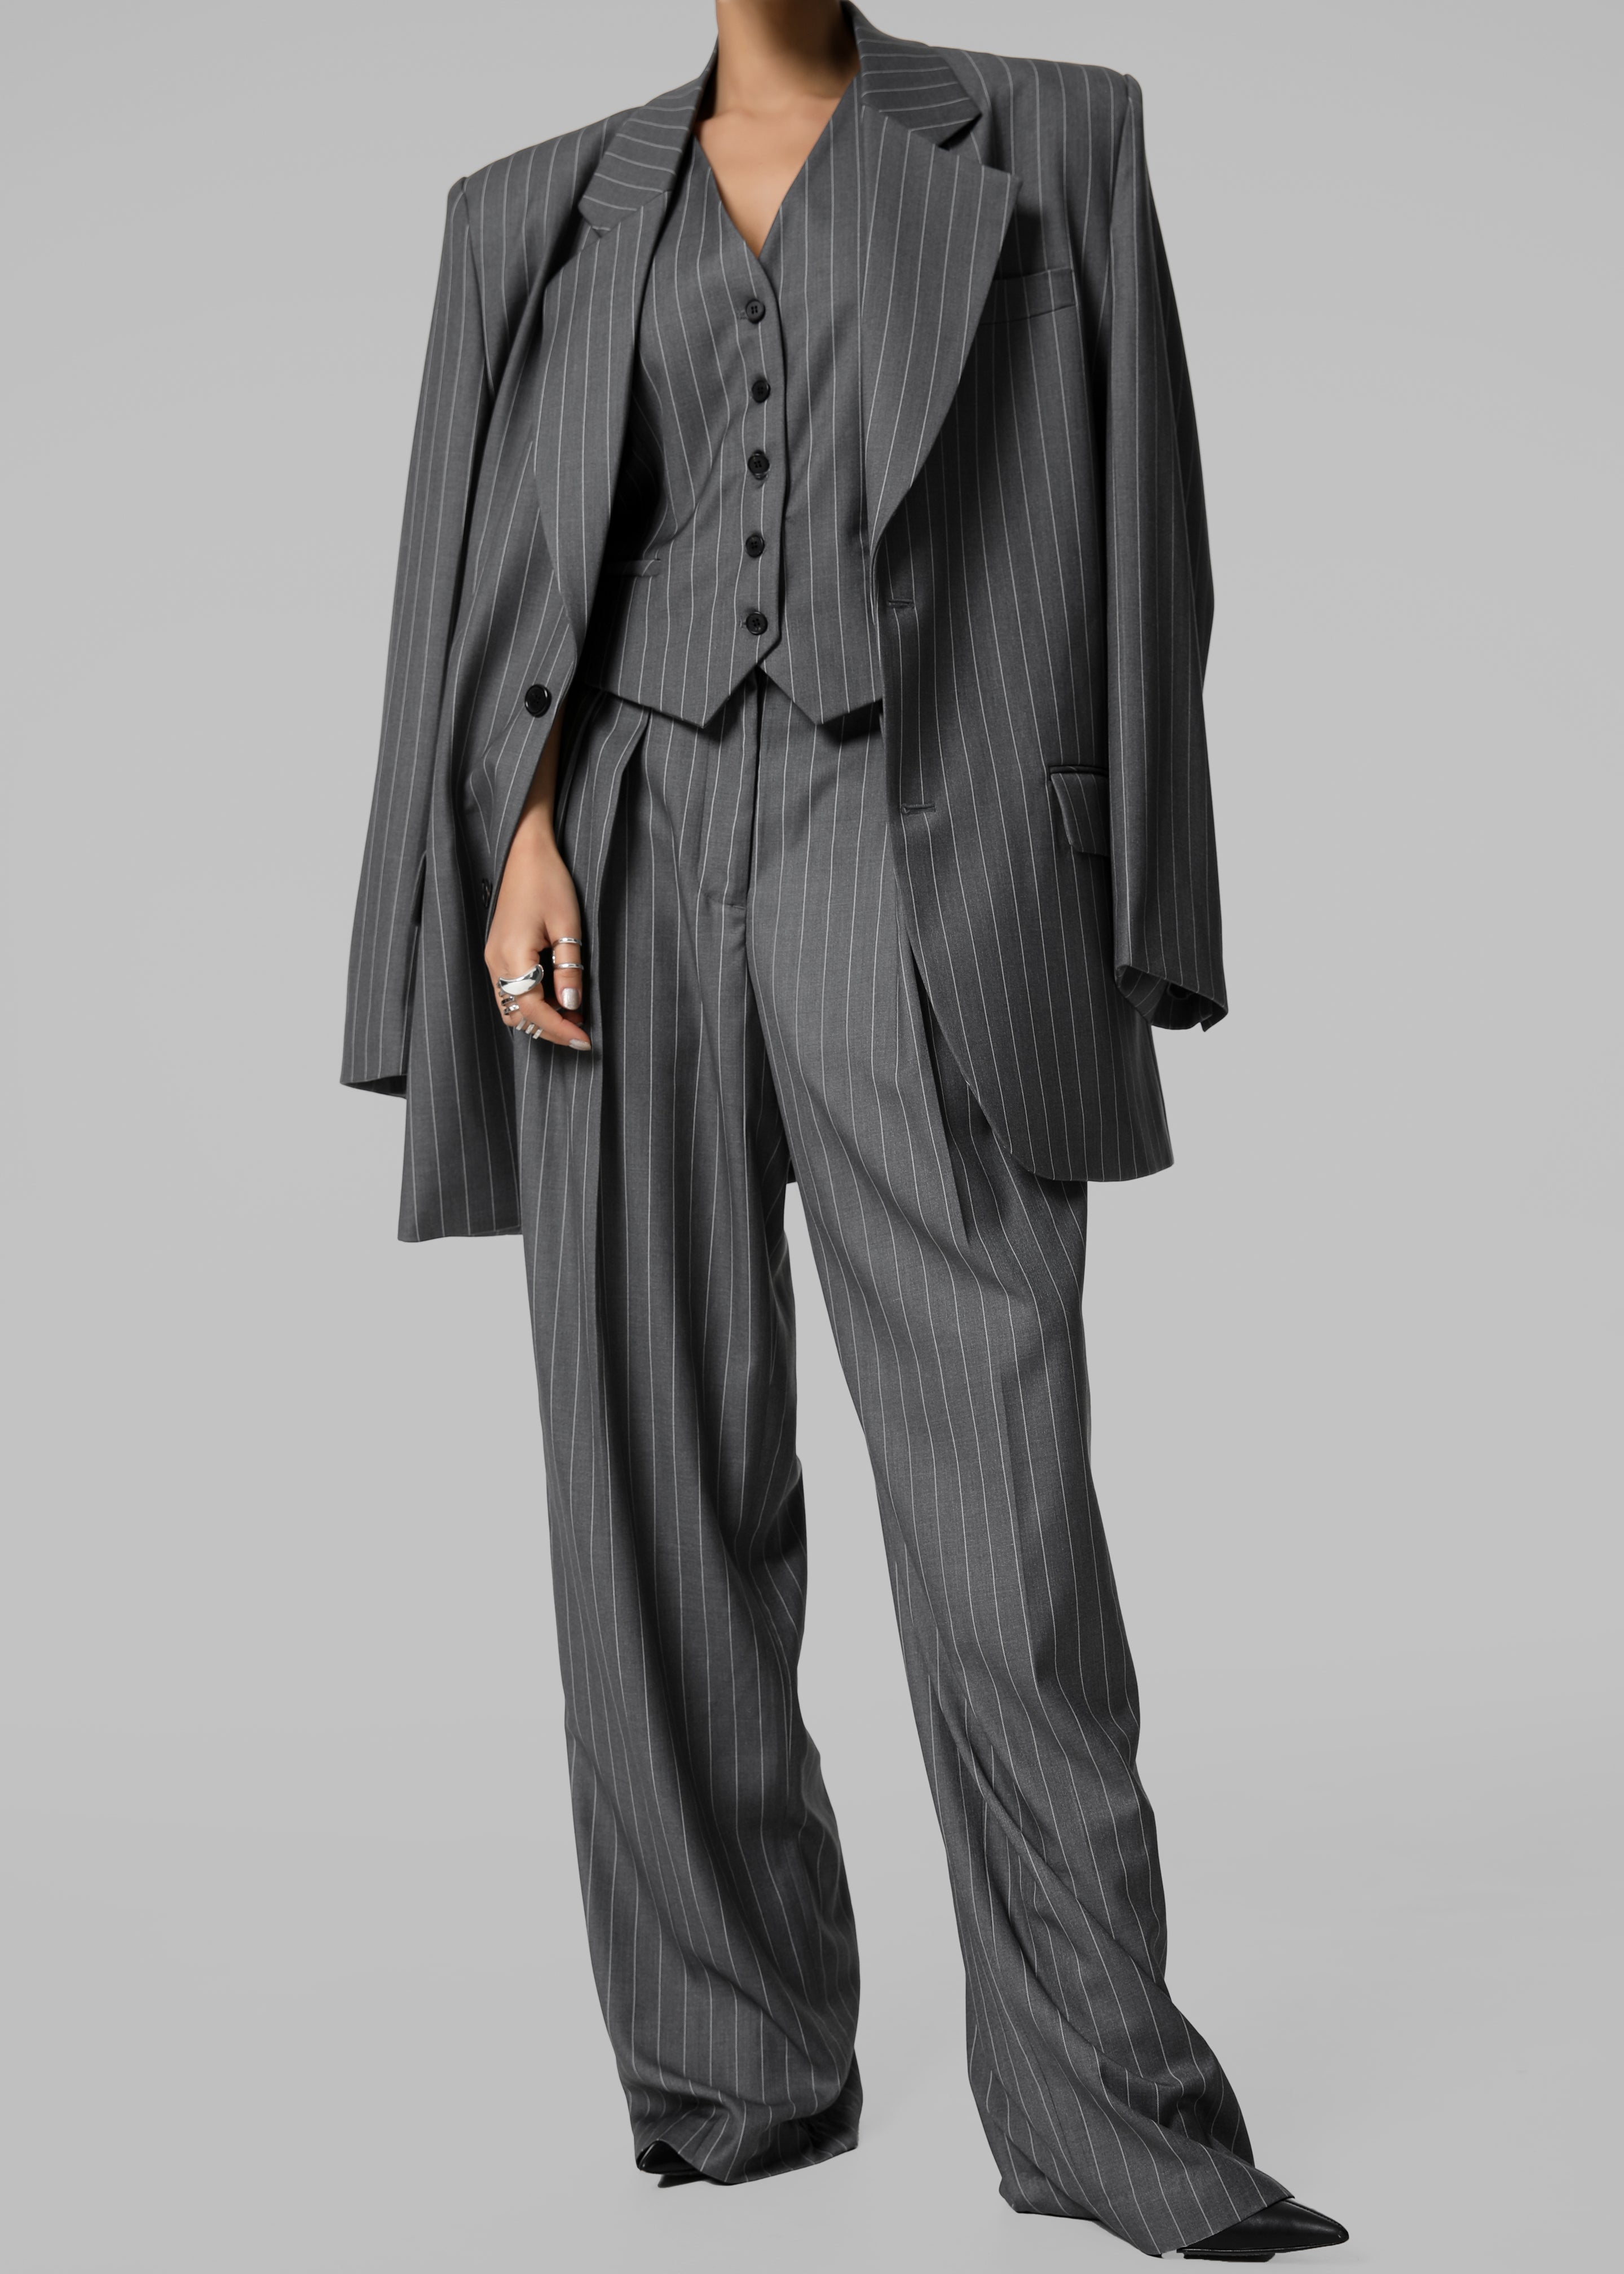 Holland Pleated Trousers - Charcoal/White Pinstripe - 3